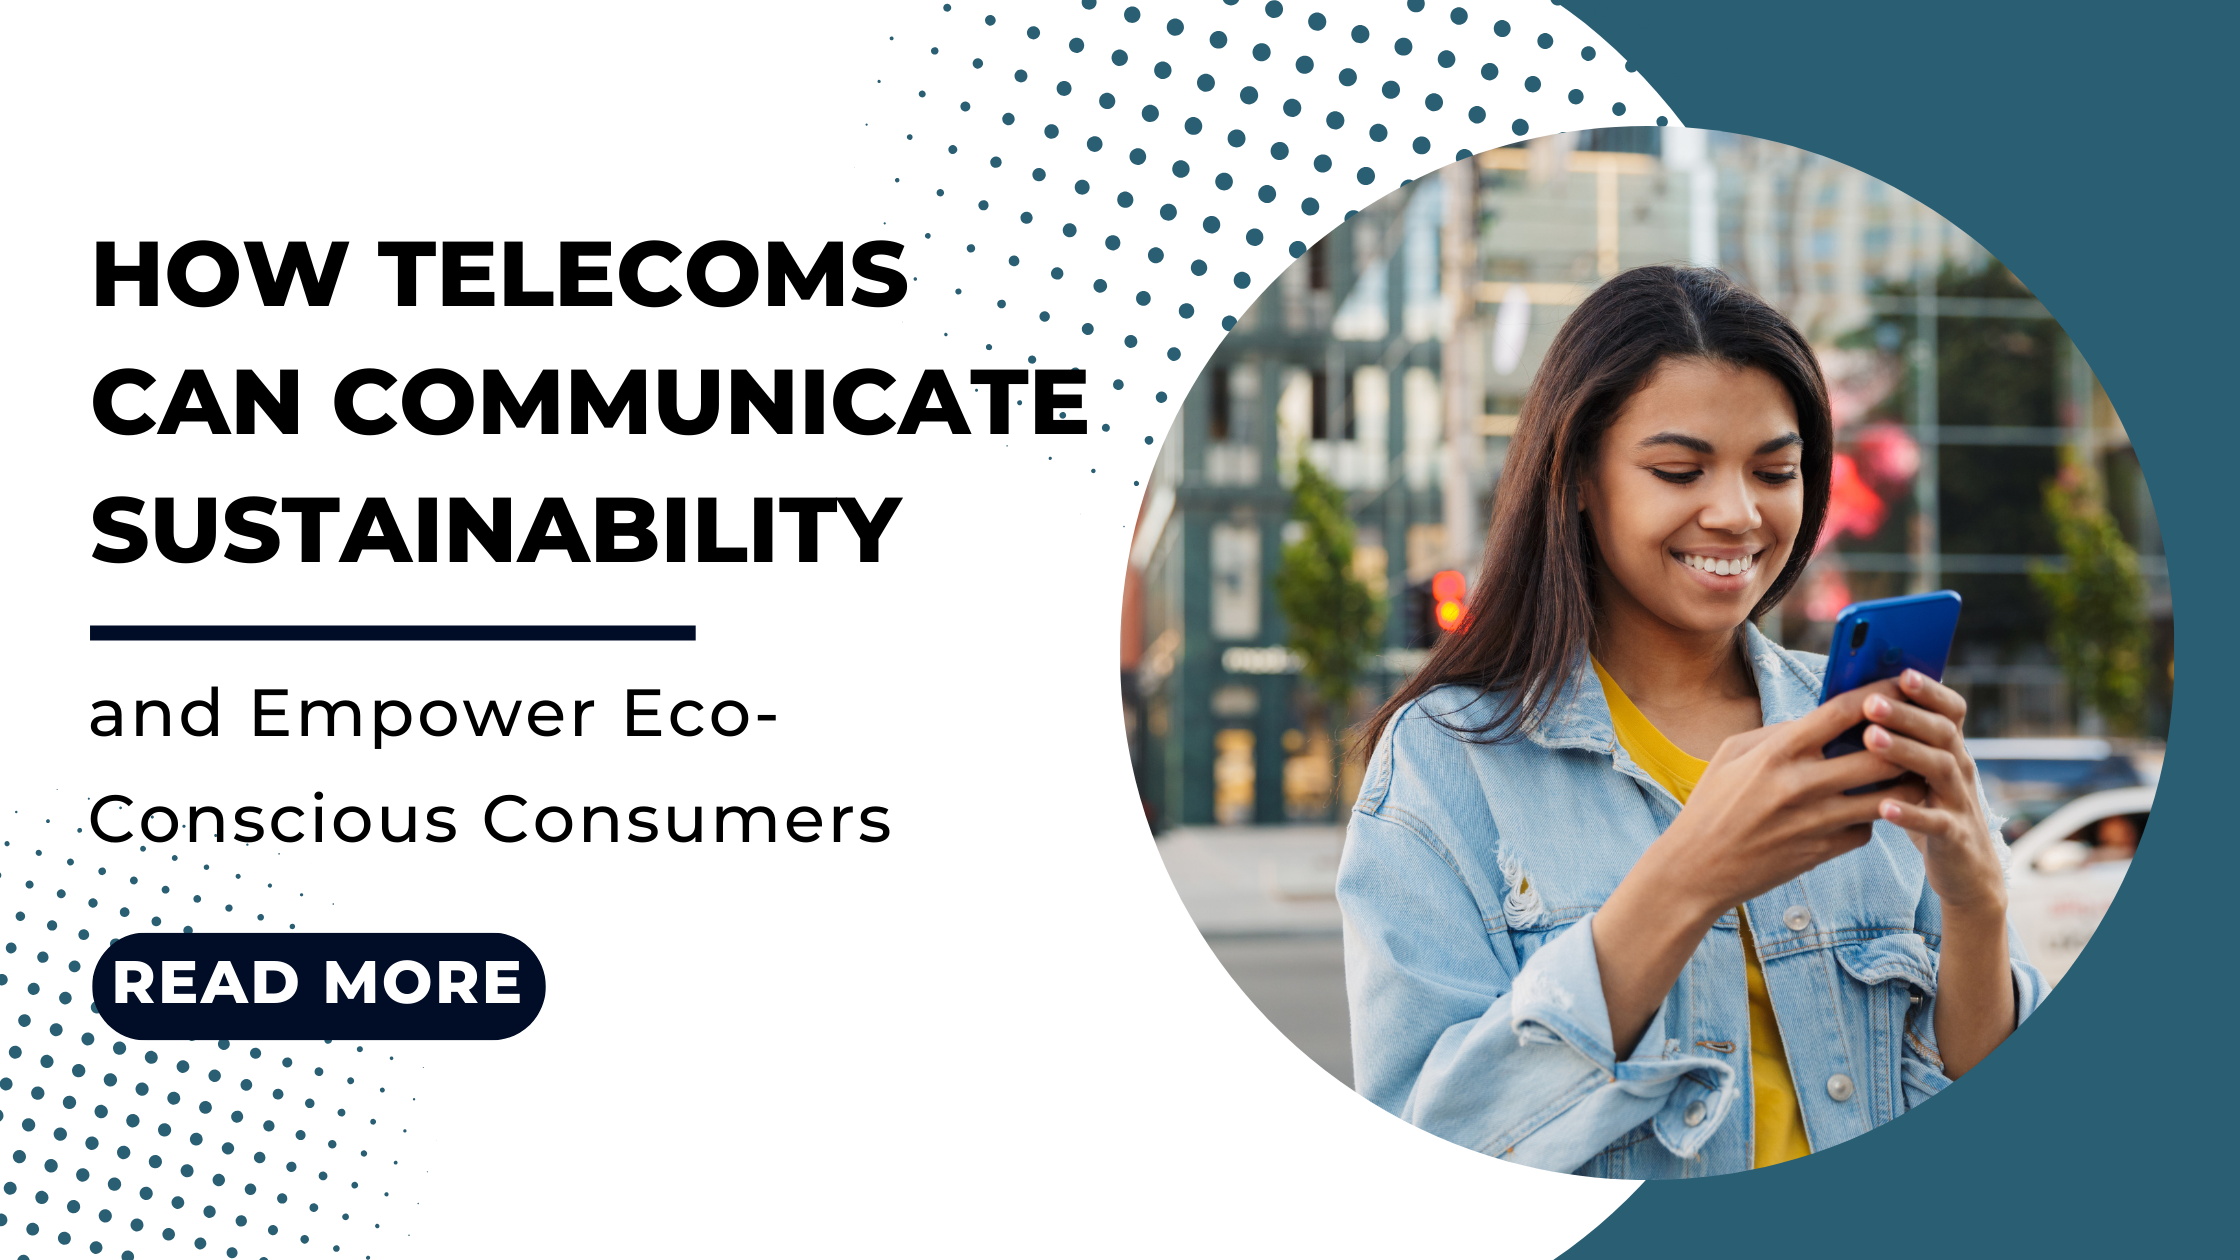 How Telecoms Can Communicate Sustainability and Empower Eco-Conscious Consumers